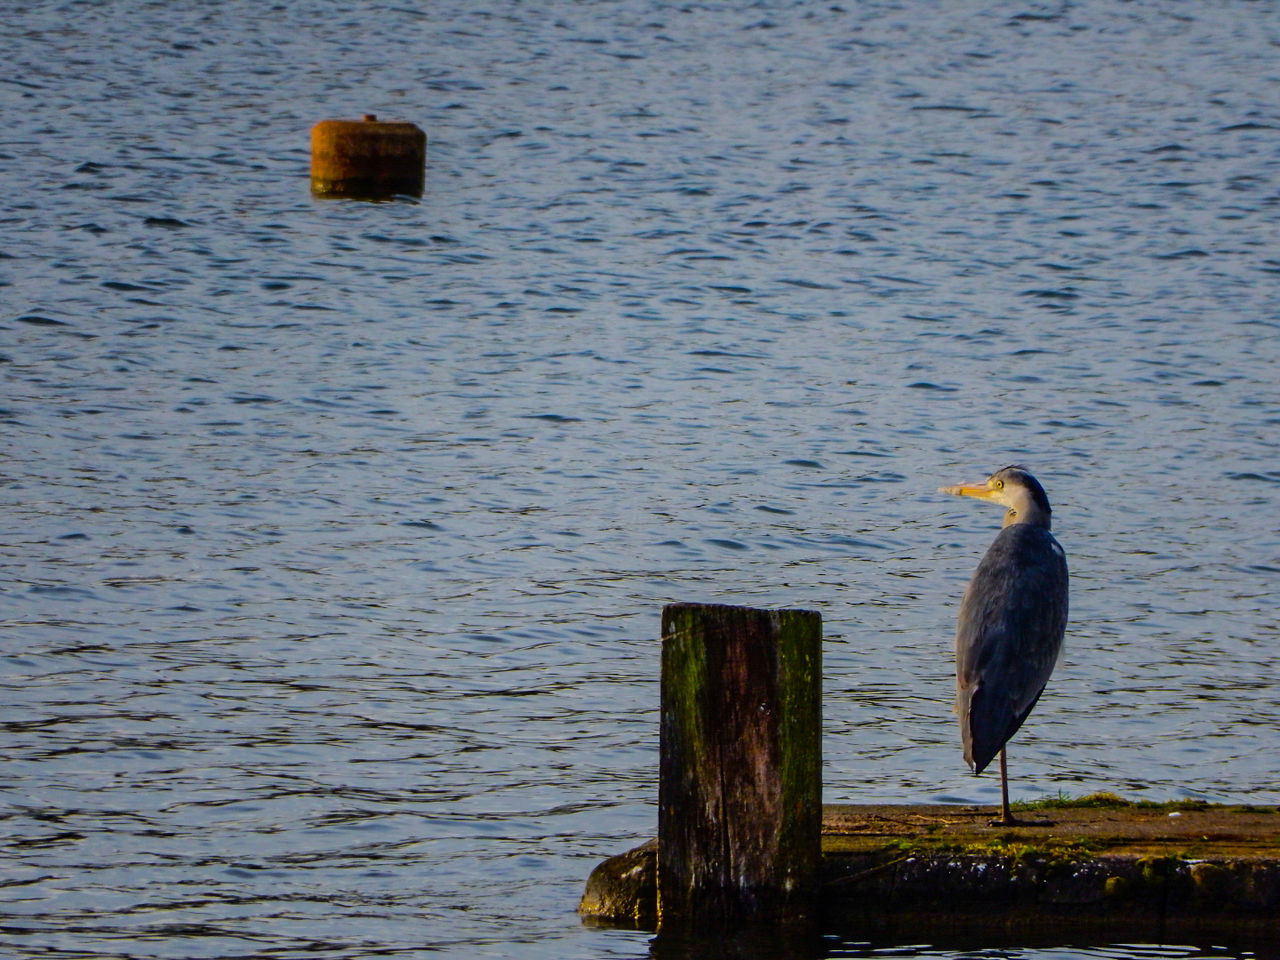 BIRDS PERCHING ON WOODEN POST IN LAKE